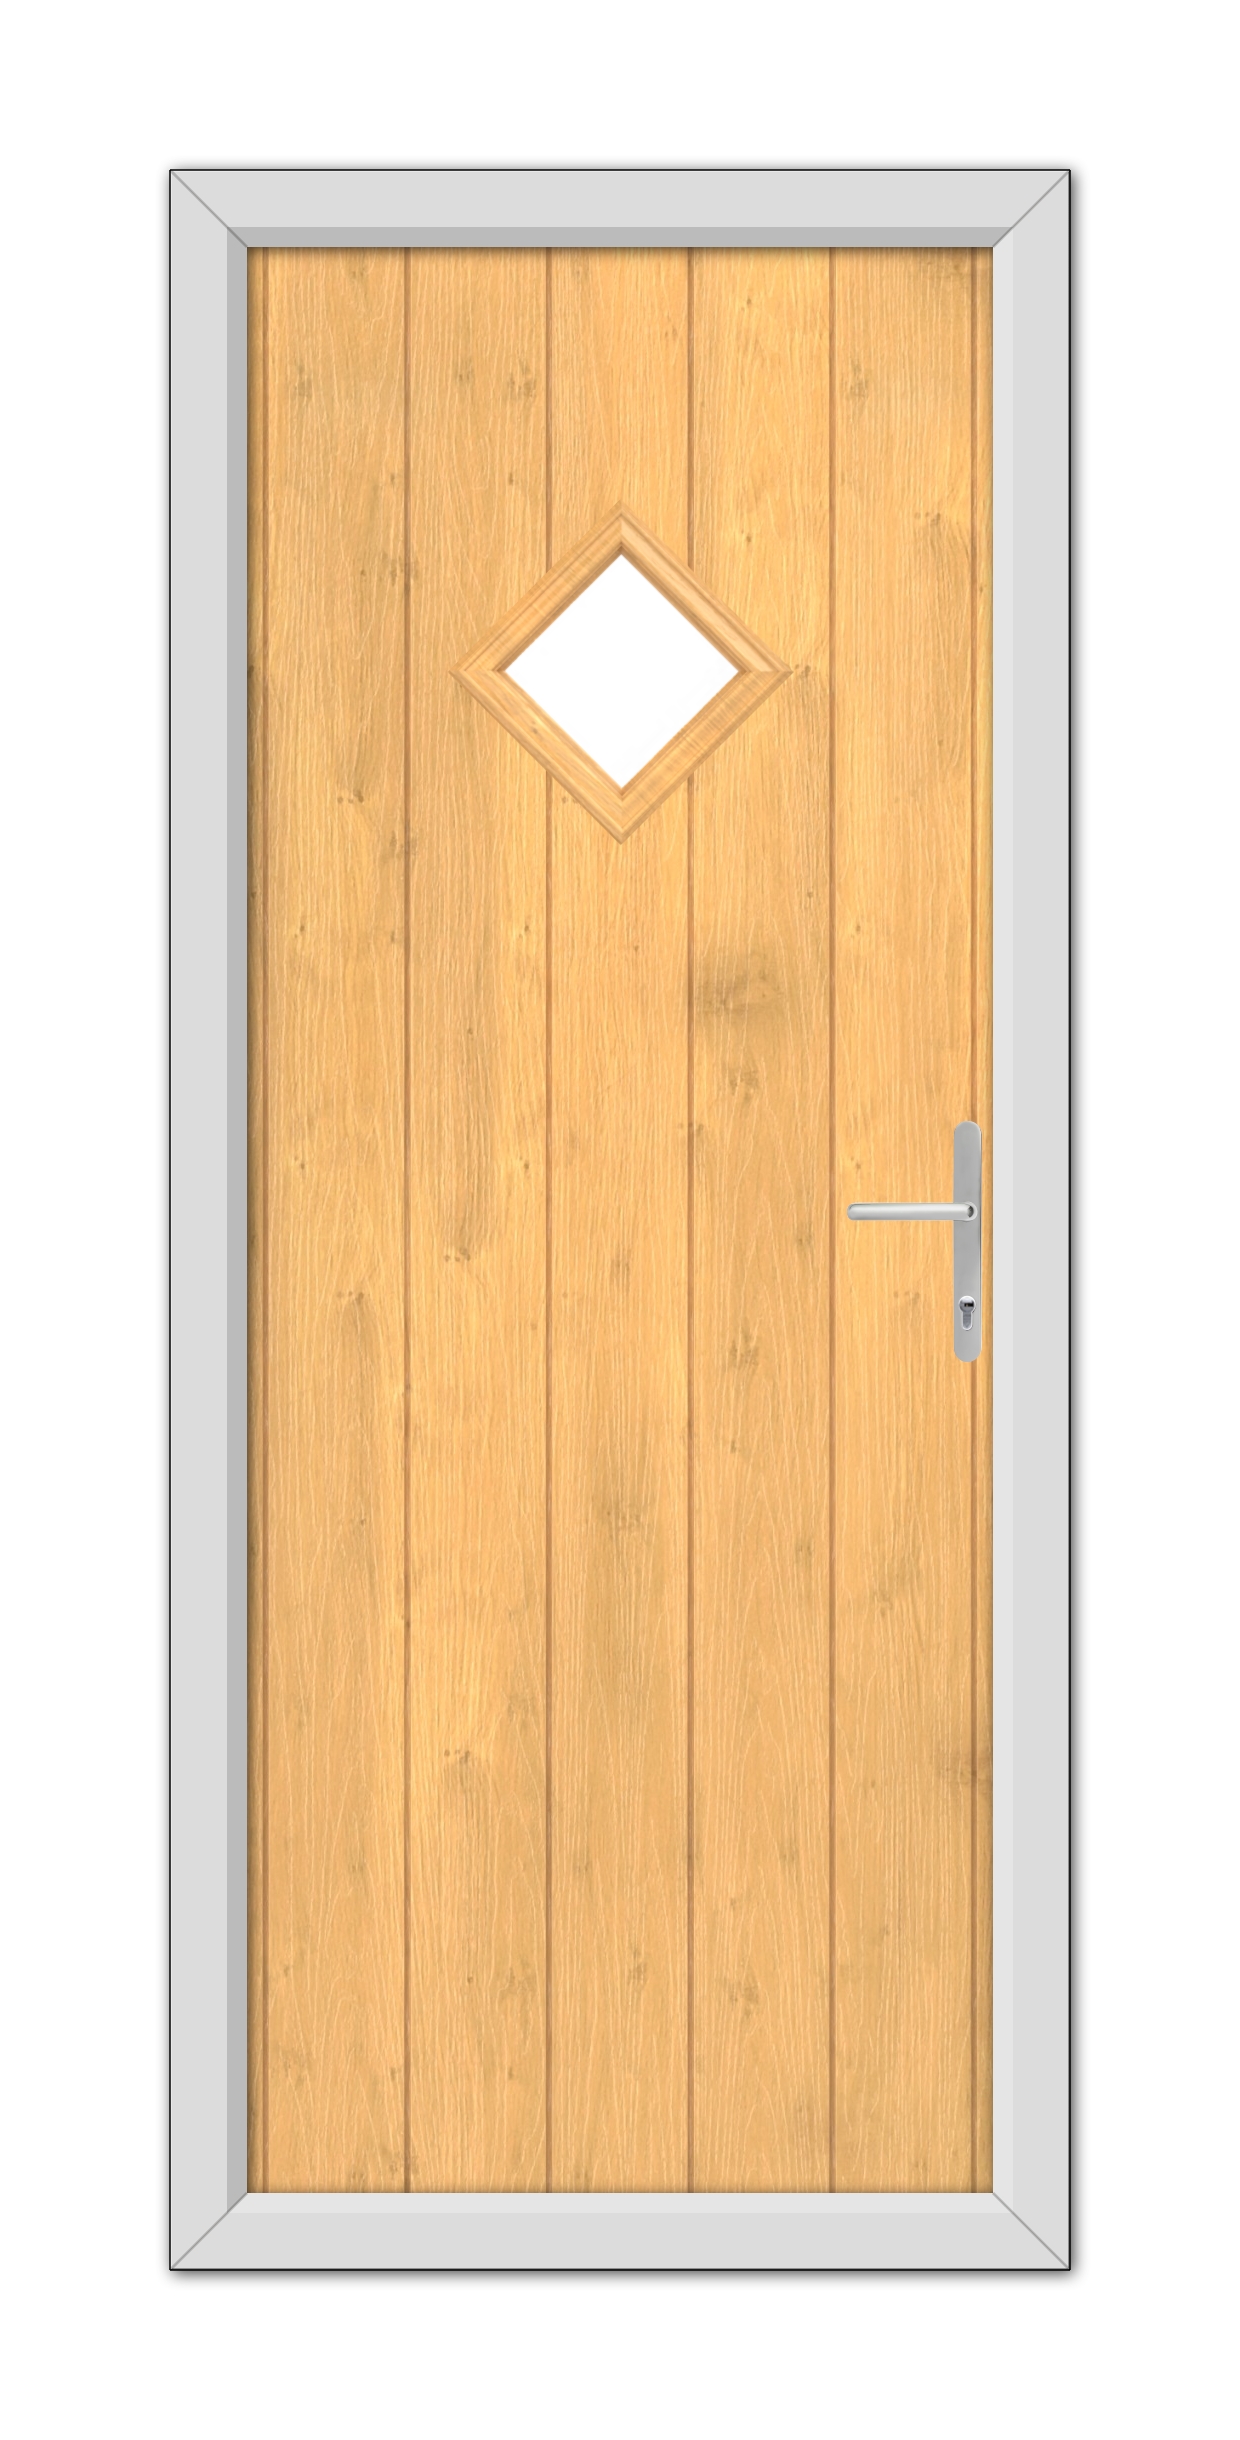 An Irish Oak Cornwall Composite Door 48mm Timber Core with a diamond-shaped window, set within a gray frame, featuring a modern handle on the right side.